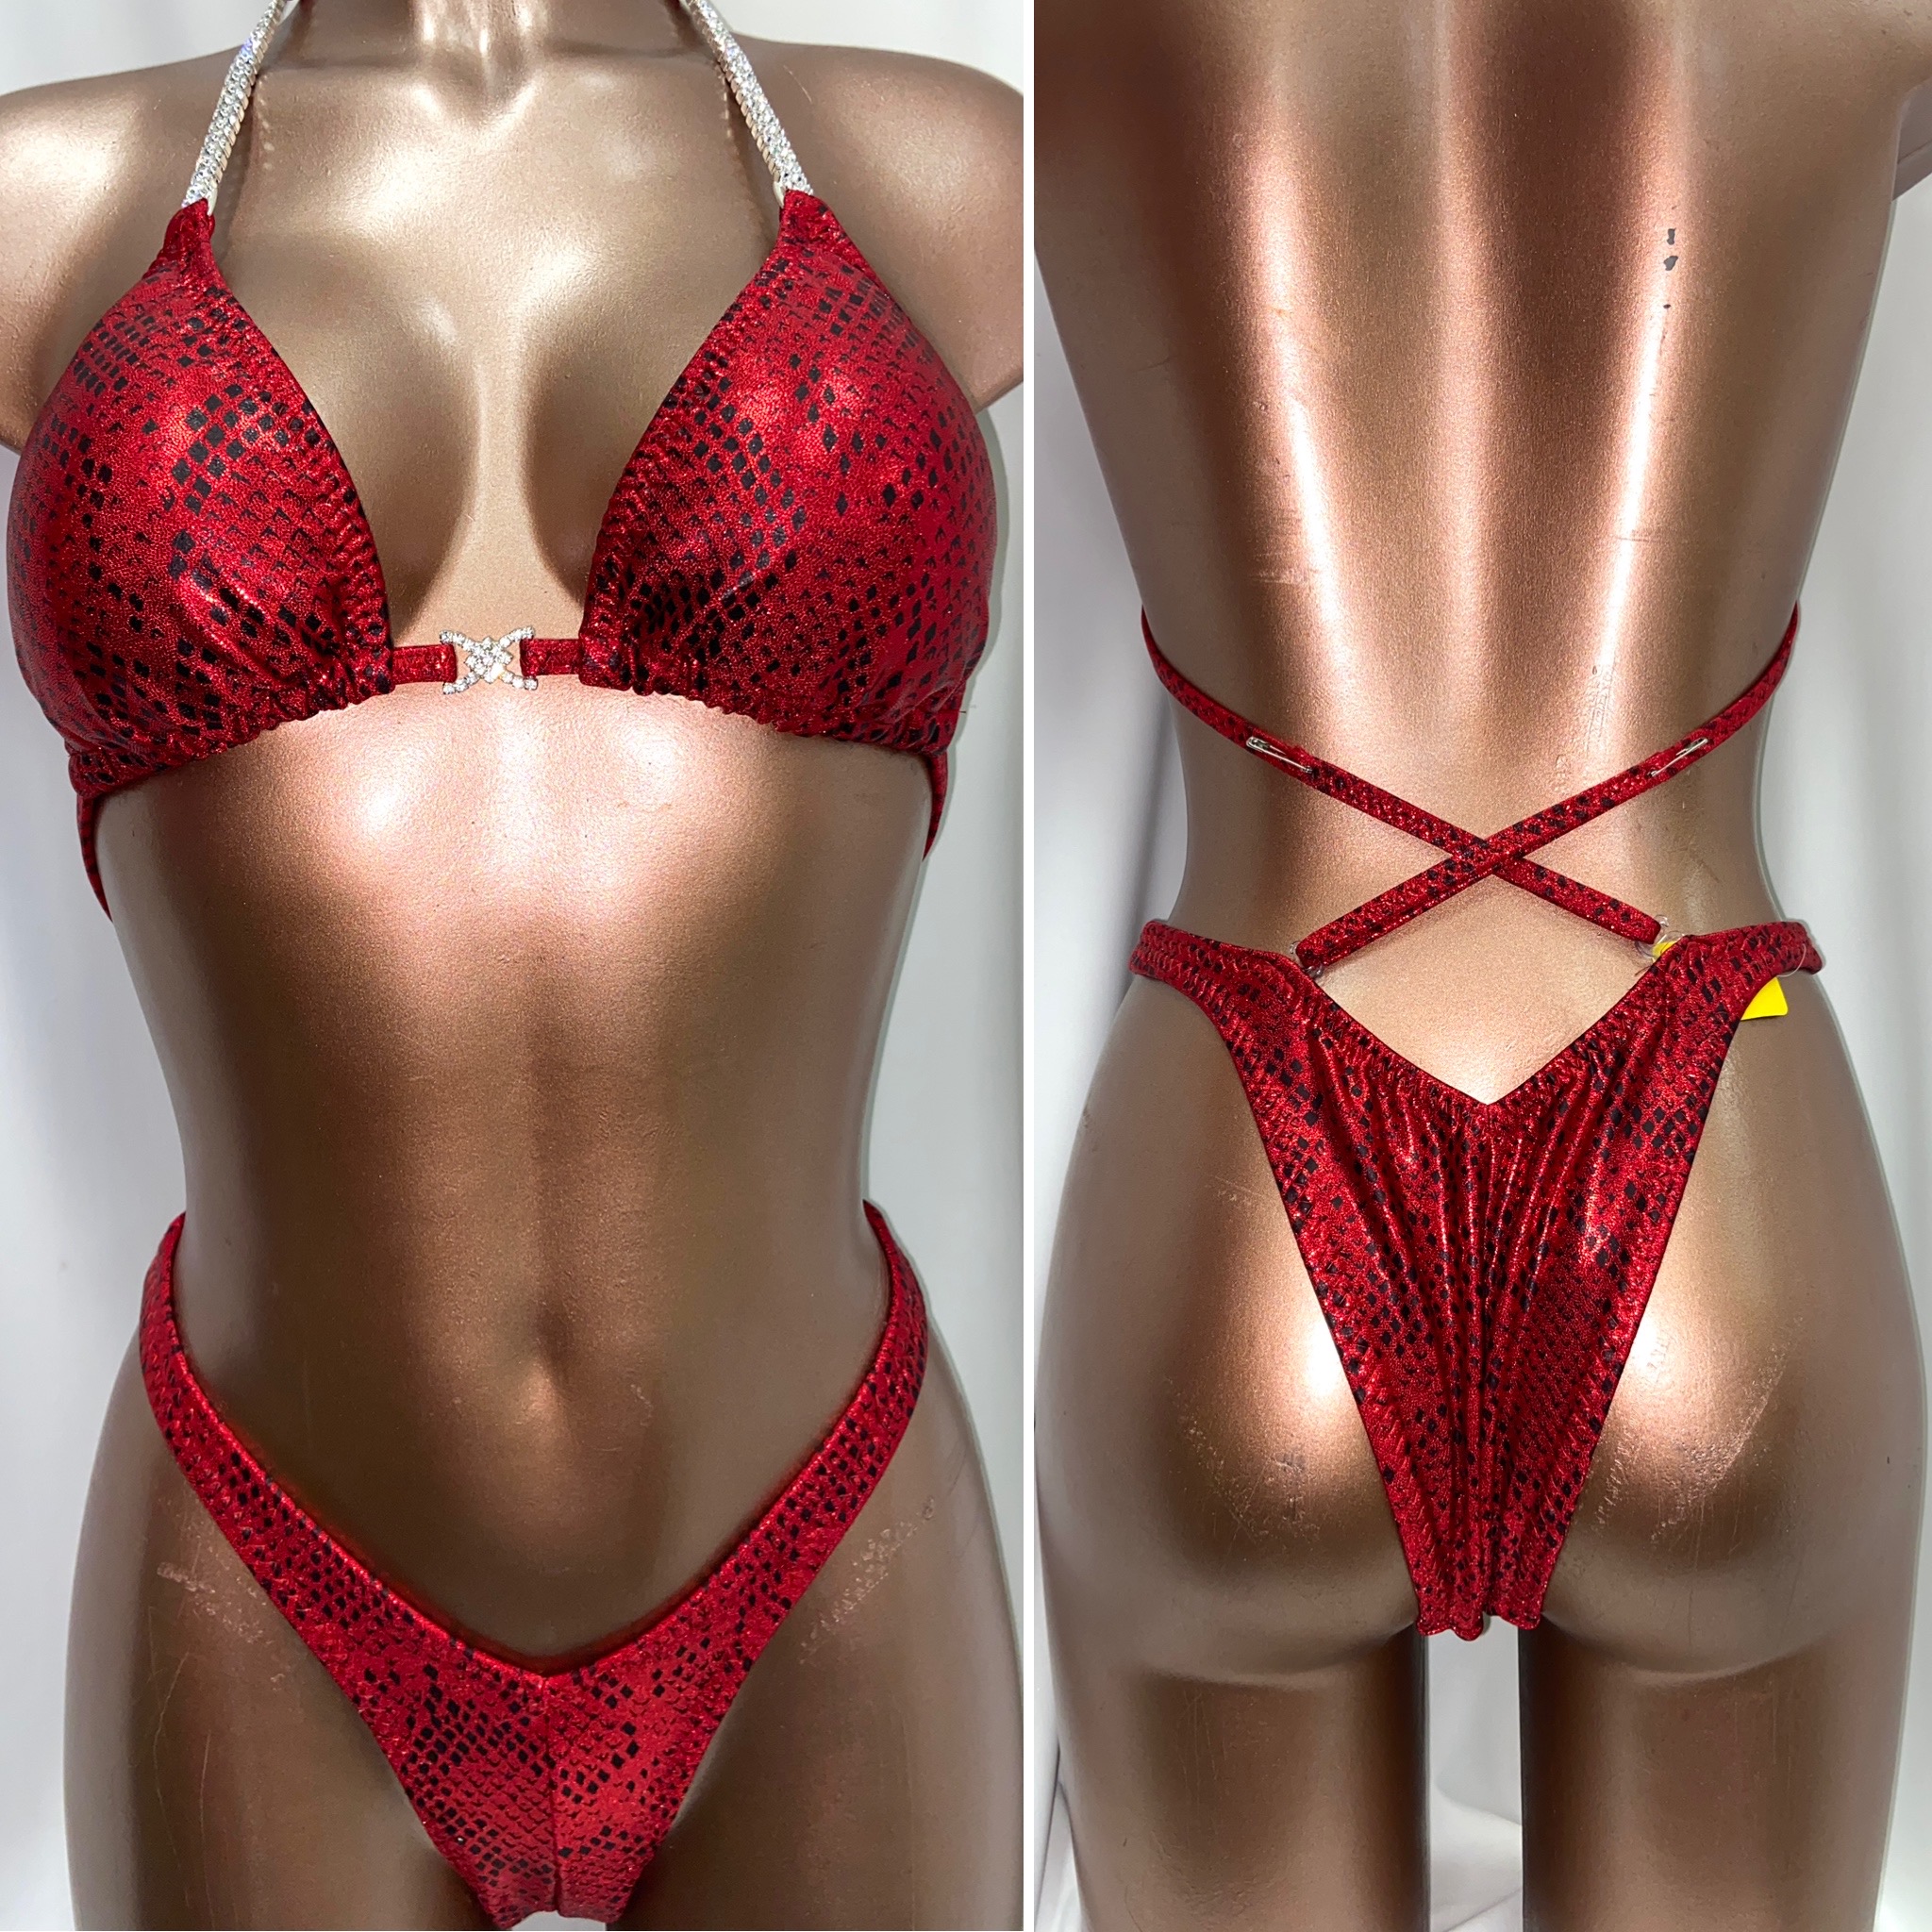 P7027
$115
C slim sliding top
Medium front
small back 
red frost snake pattern 